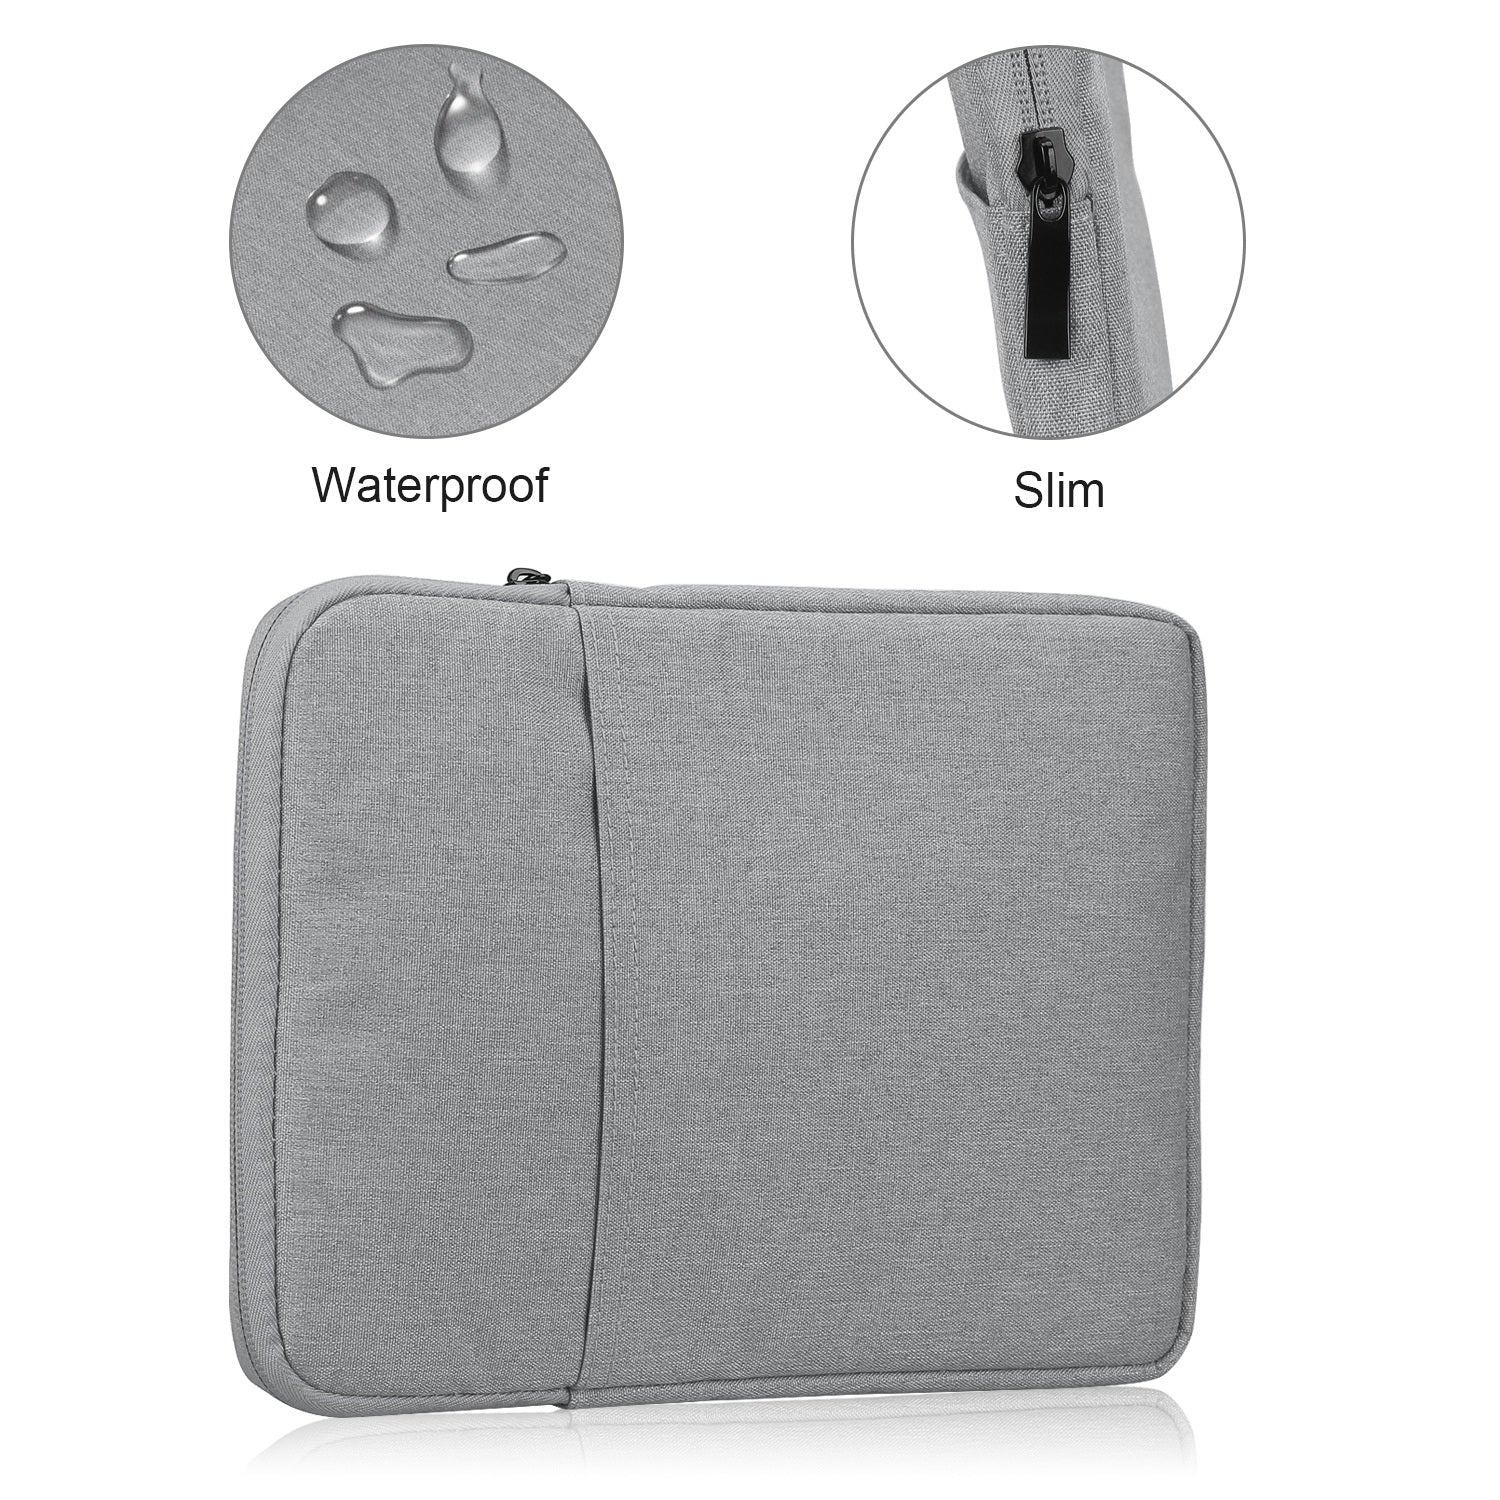 Shockproof Sleeve Case for iPad Mini 4 3 2 / Air 2 Air 1 /Pro